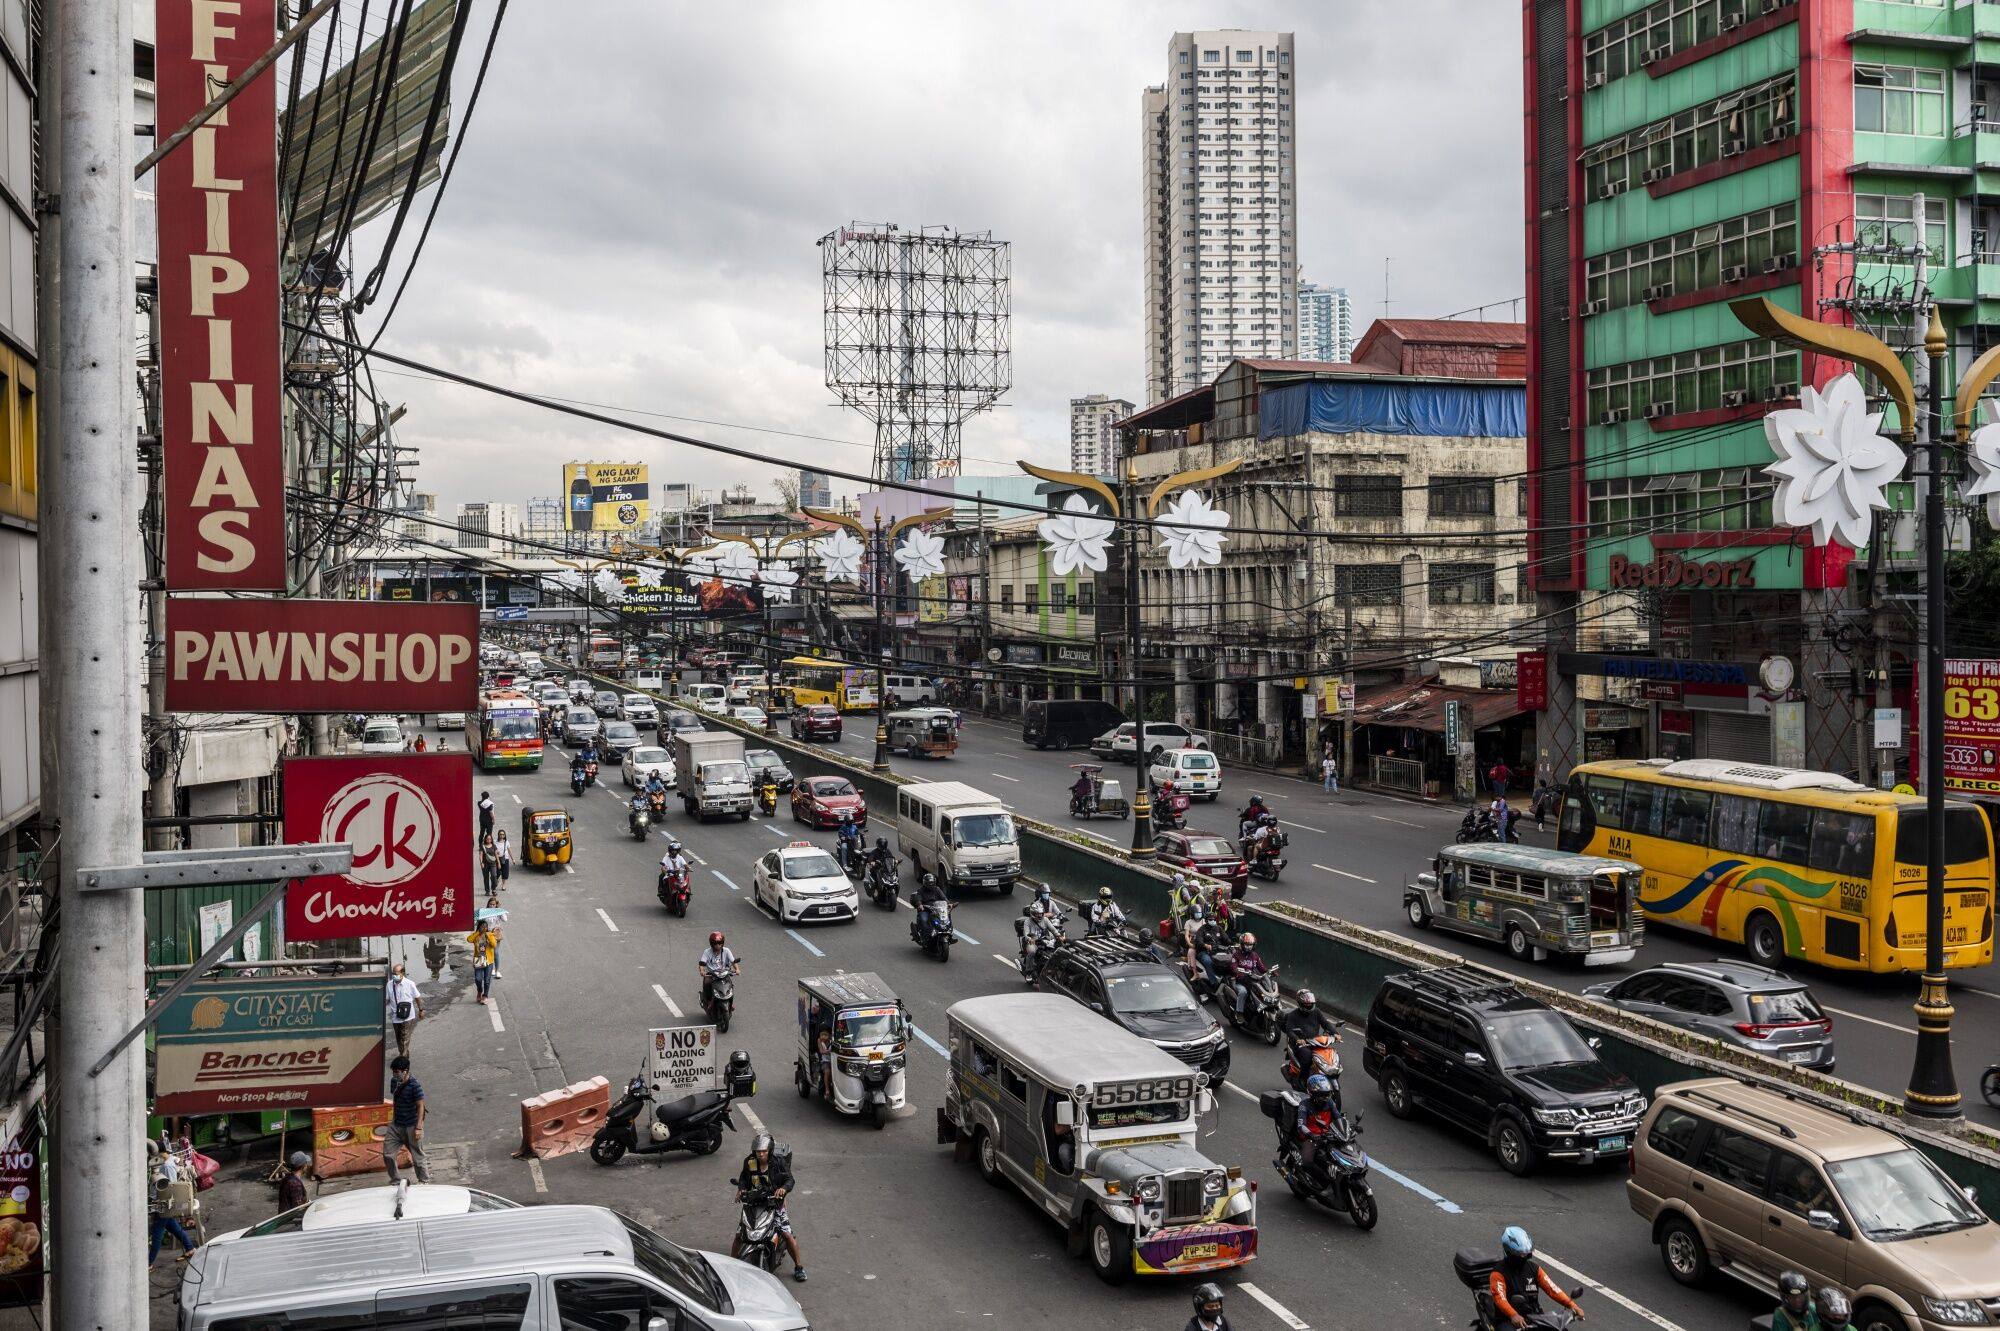 Vehicles travel along a road in Manila. Two Japanese men currently detained in Manila are members of a criminal syndicate that organised a series of burglaries in Japan, Philippine authorities said. Photo: Bloomberg